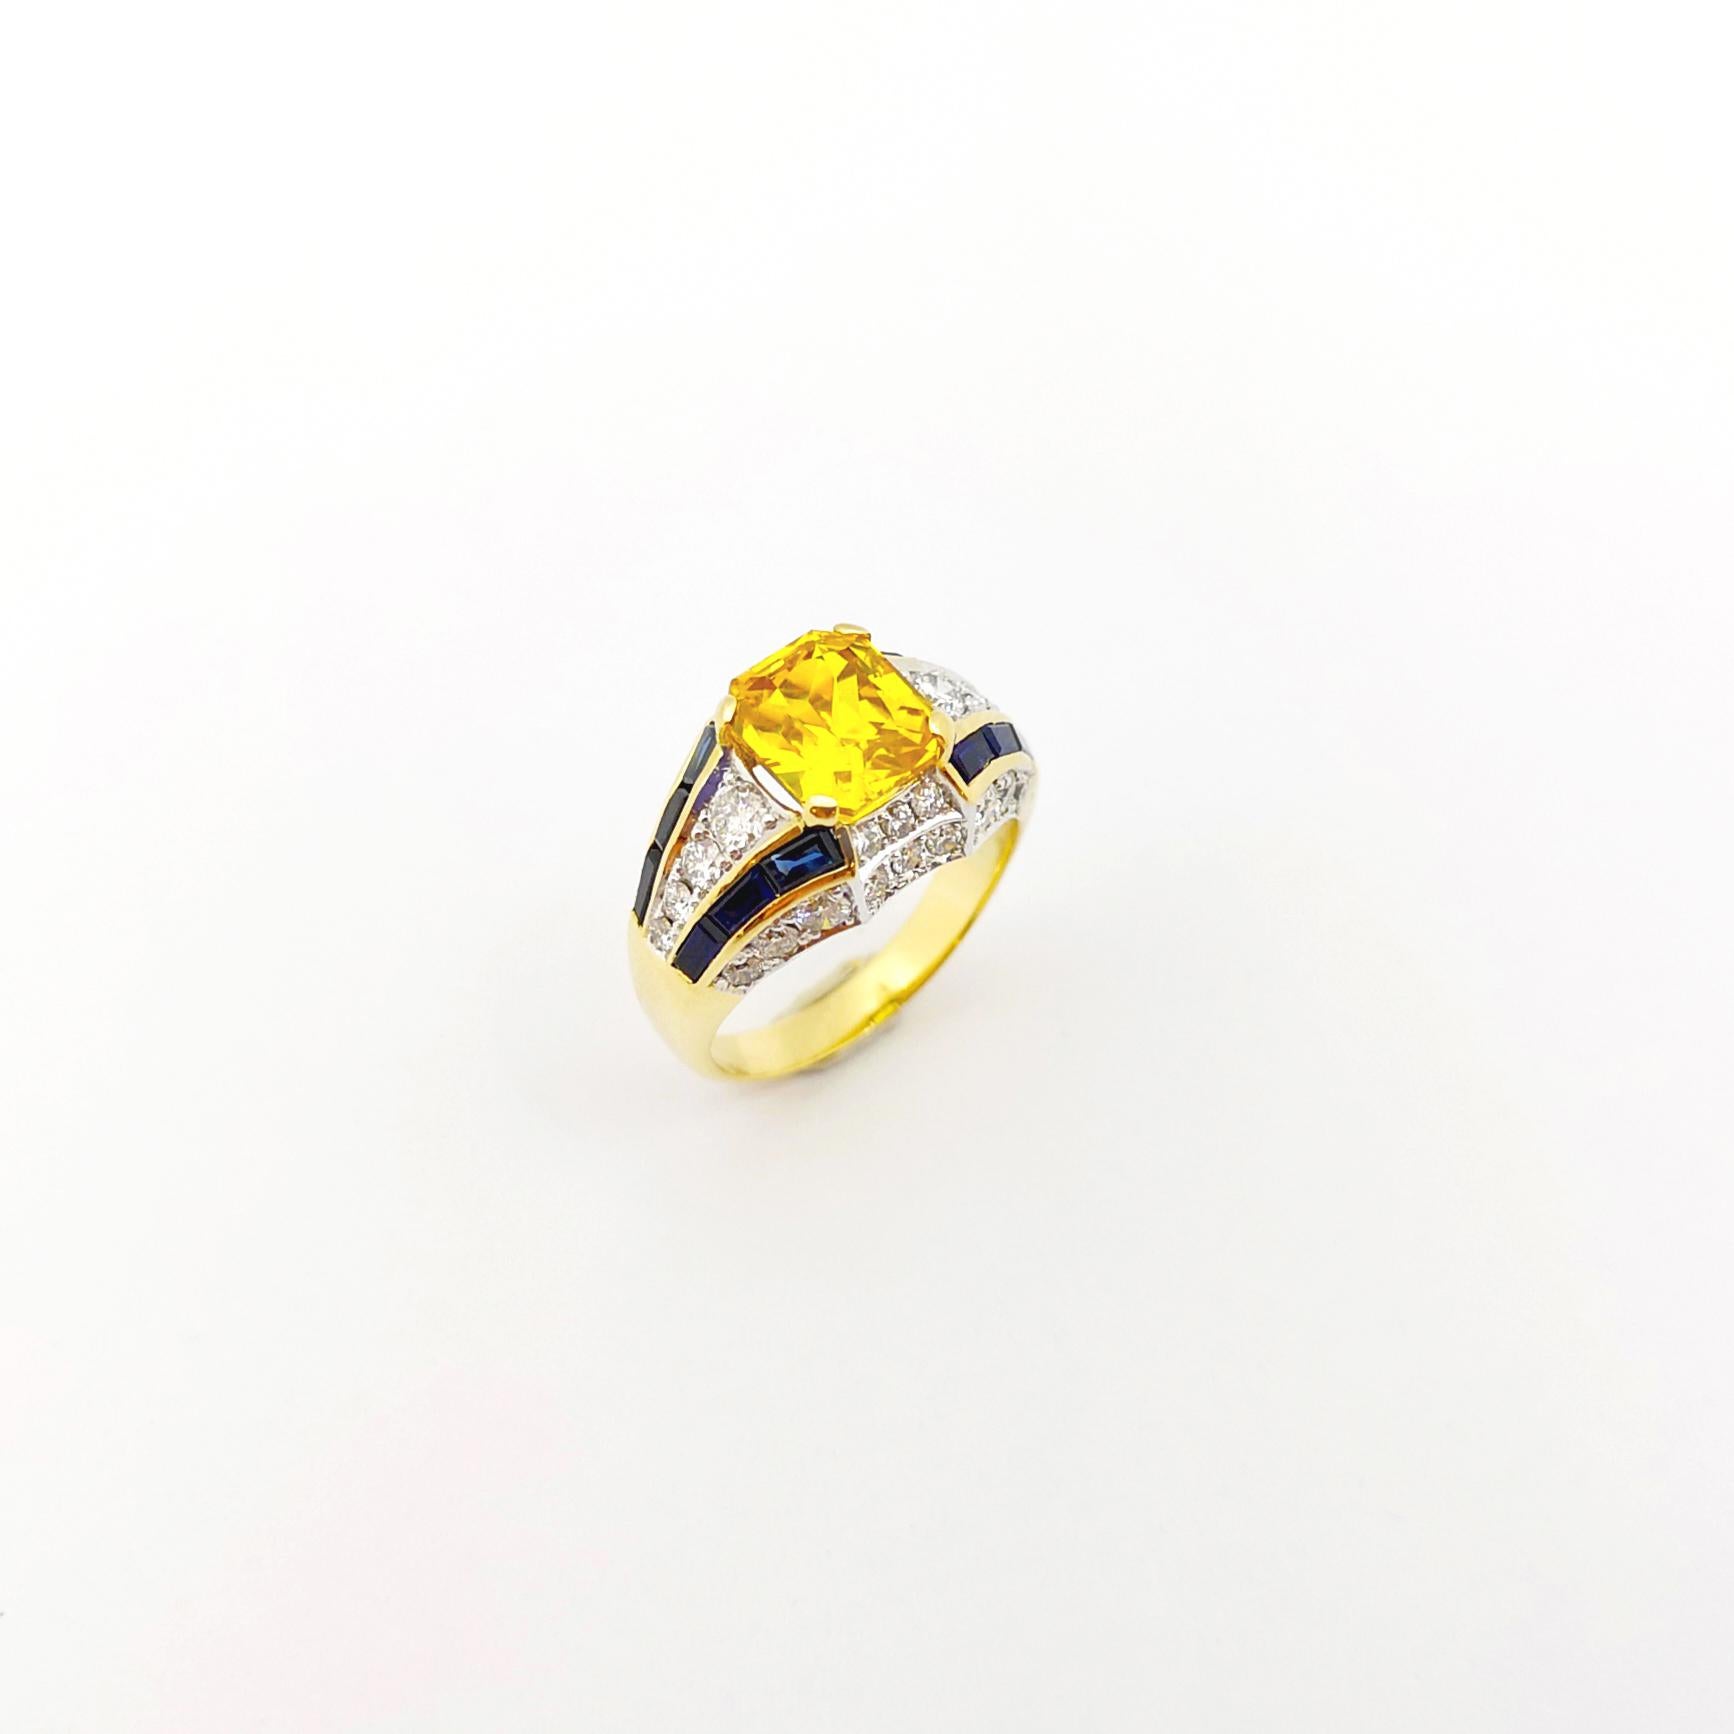 Yellow Sapphire with Blue Sapphire and Diamond Ring set in 18K Yellow/White Gold For Sale 8